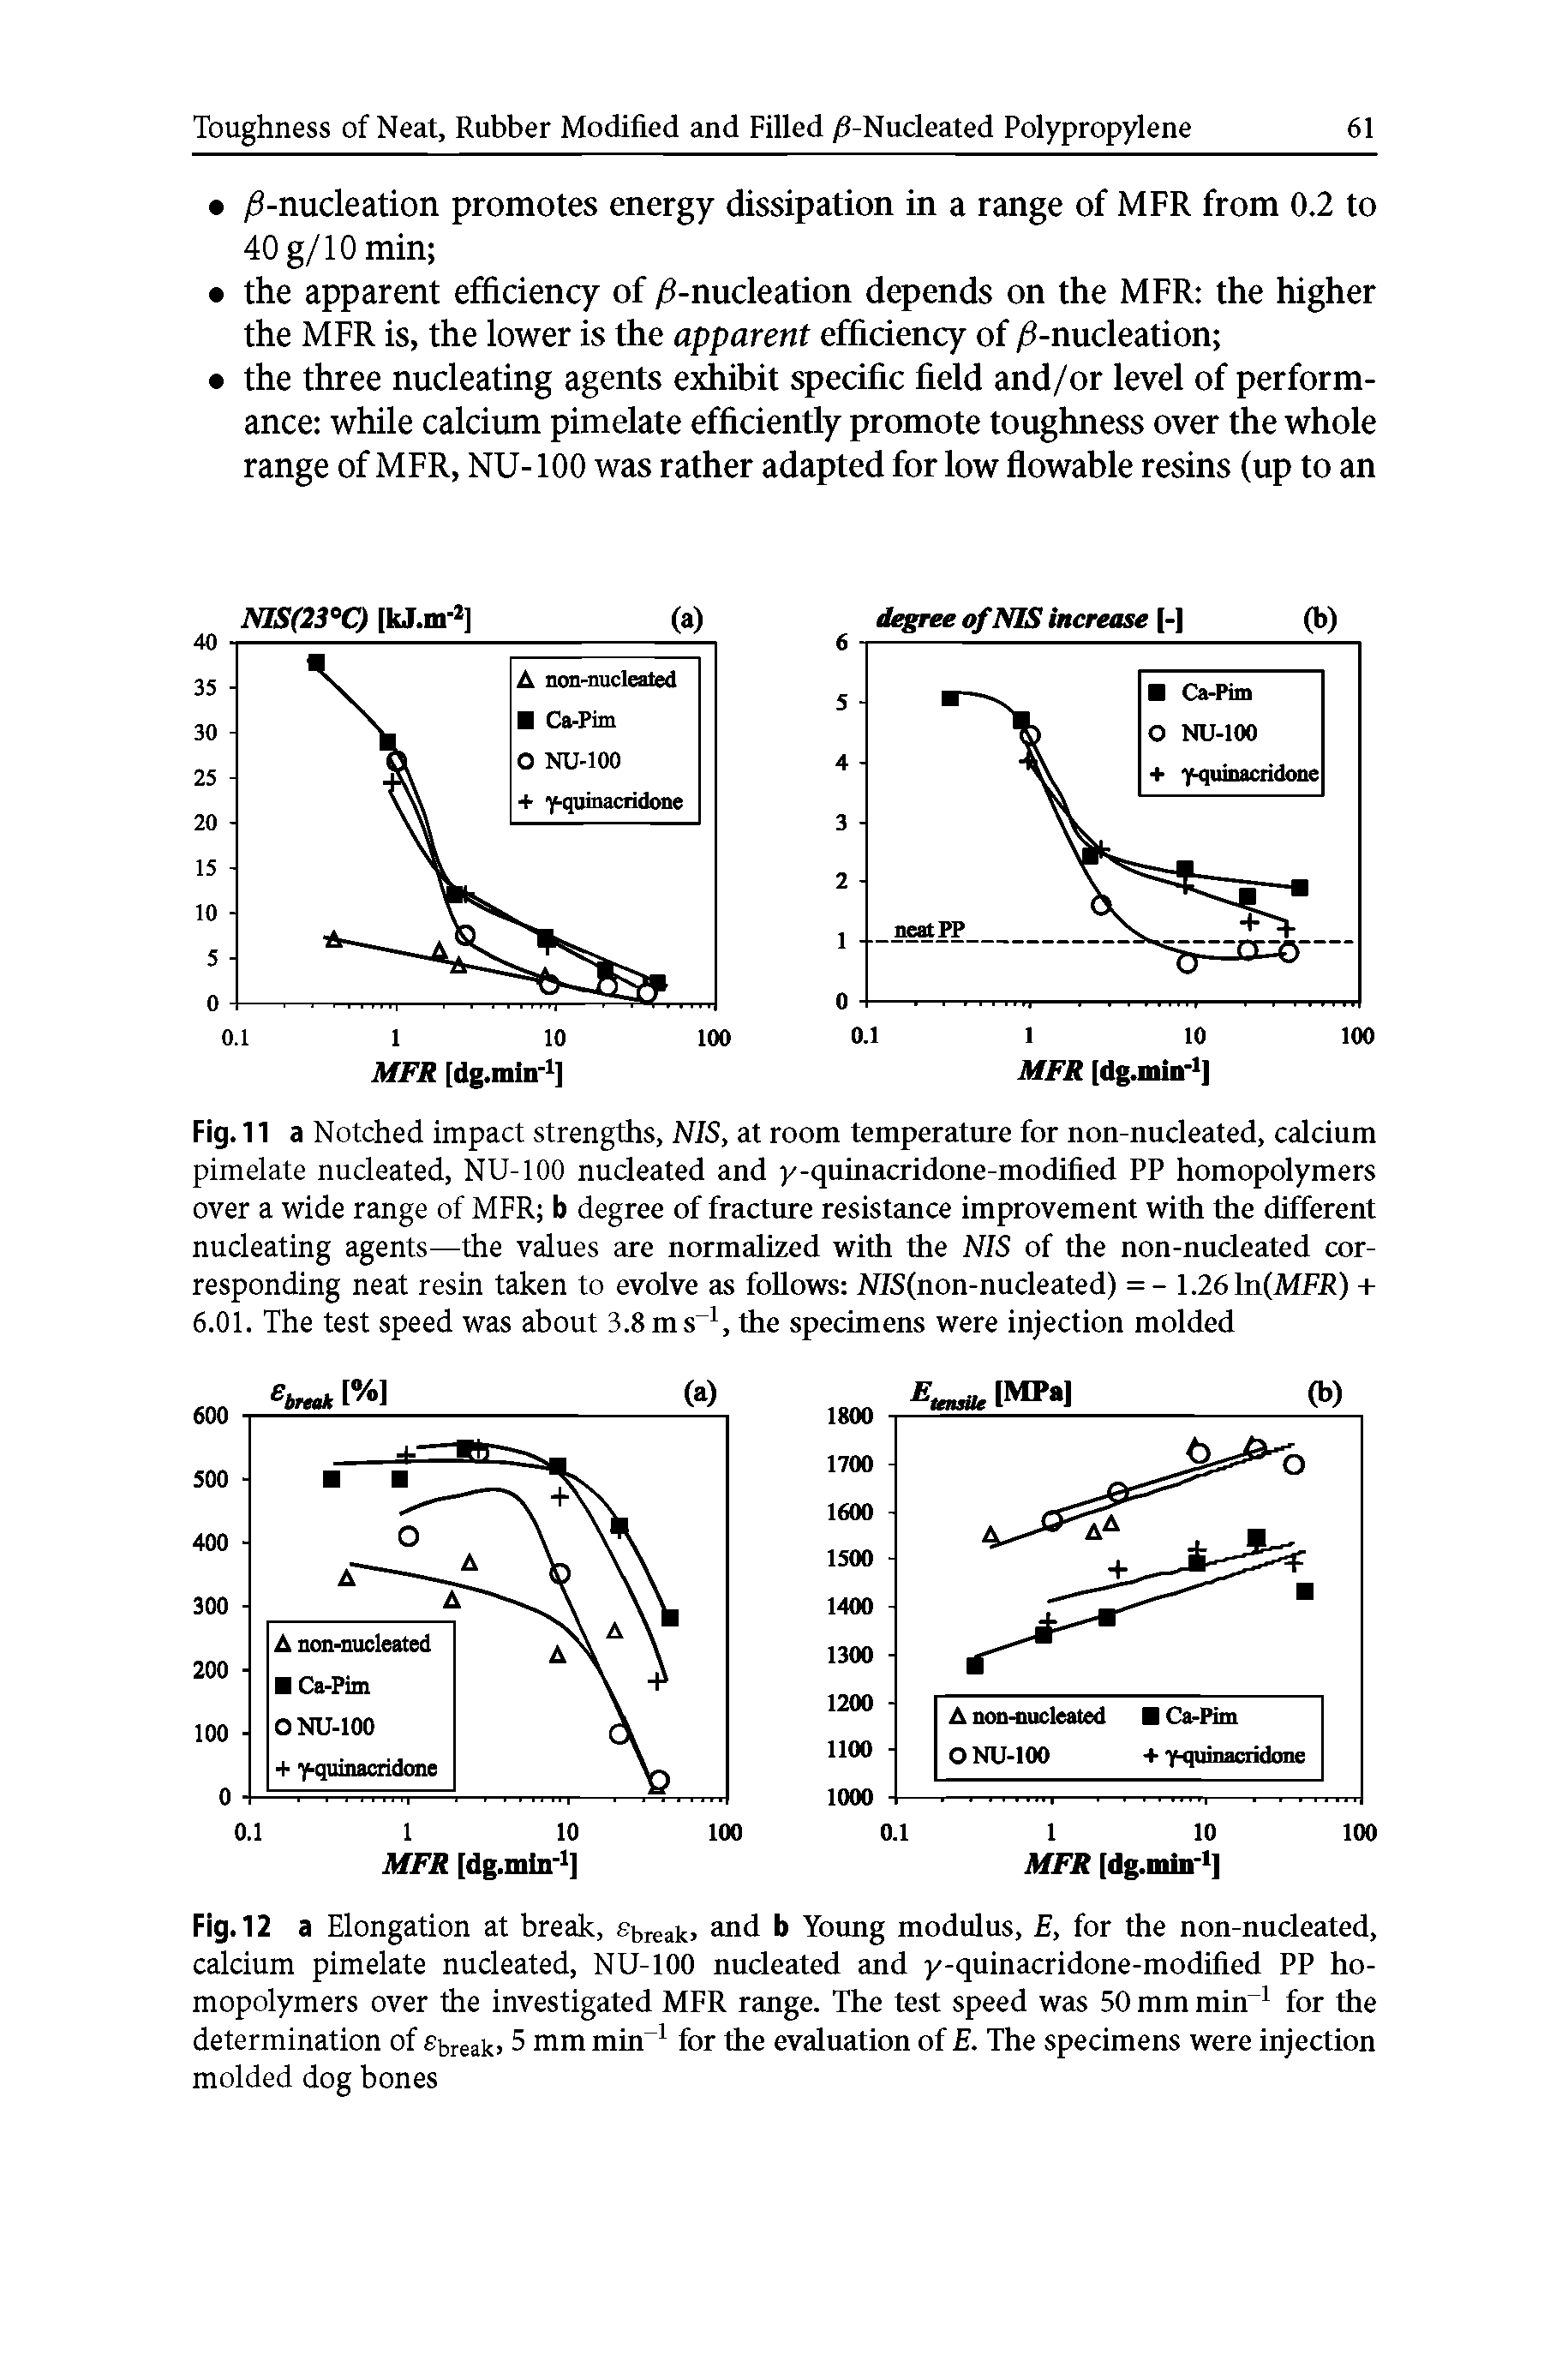 Fig. 11a Notched impact strengths, NIS, at room temperature for non-nucleated, calcium pimelate nucleated, NU-100 nucleated and y-quinacridone-modified PP homopolymers over a wide range of MFR b degree of fracture resistance improvement with the different nucleating agents—the values are normalized with the NIS of the non-nucleated corresponding neat resin taken to evolve as follows MS(non-nucleated) =- 1.26 In(MFR) + 6.01. The test speed was about 3.8 ms1, the specimens were injection molded...